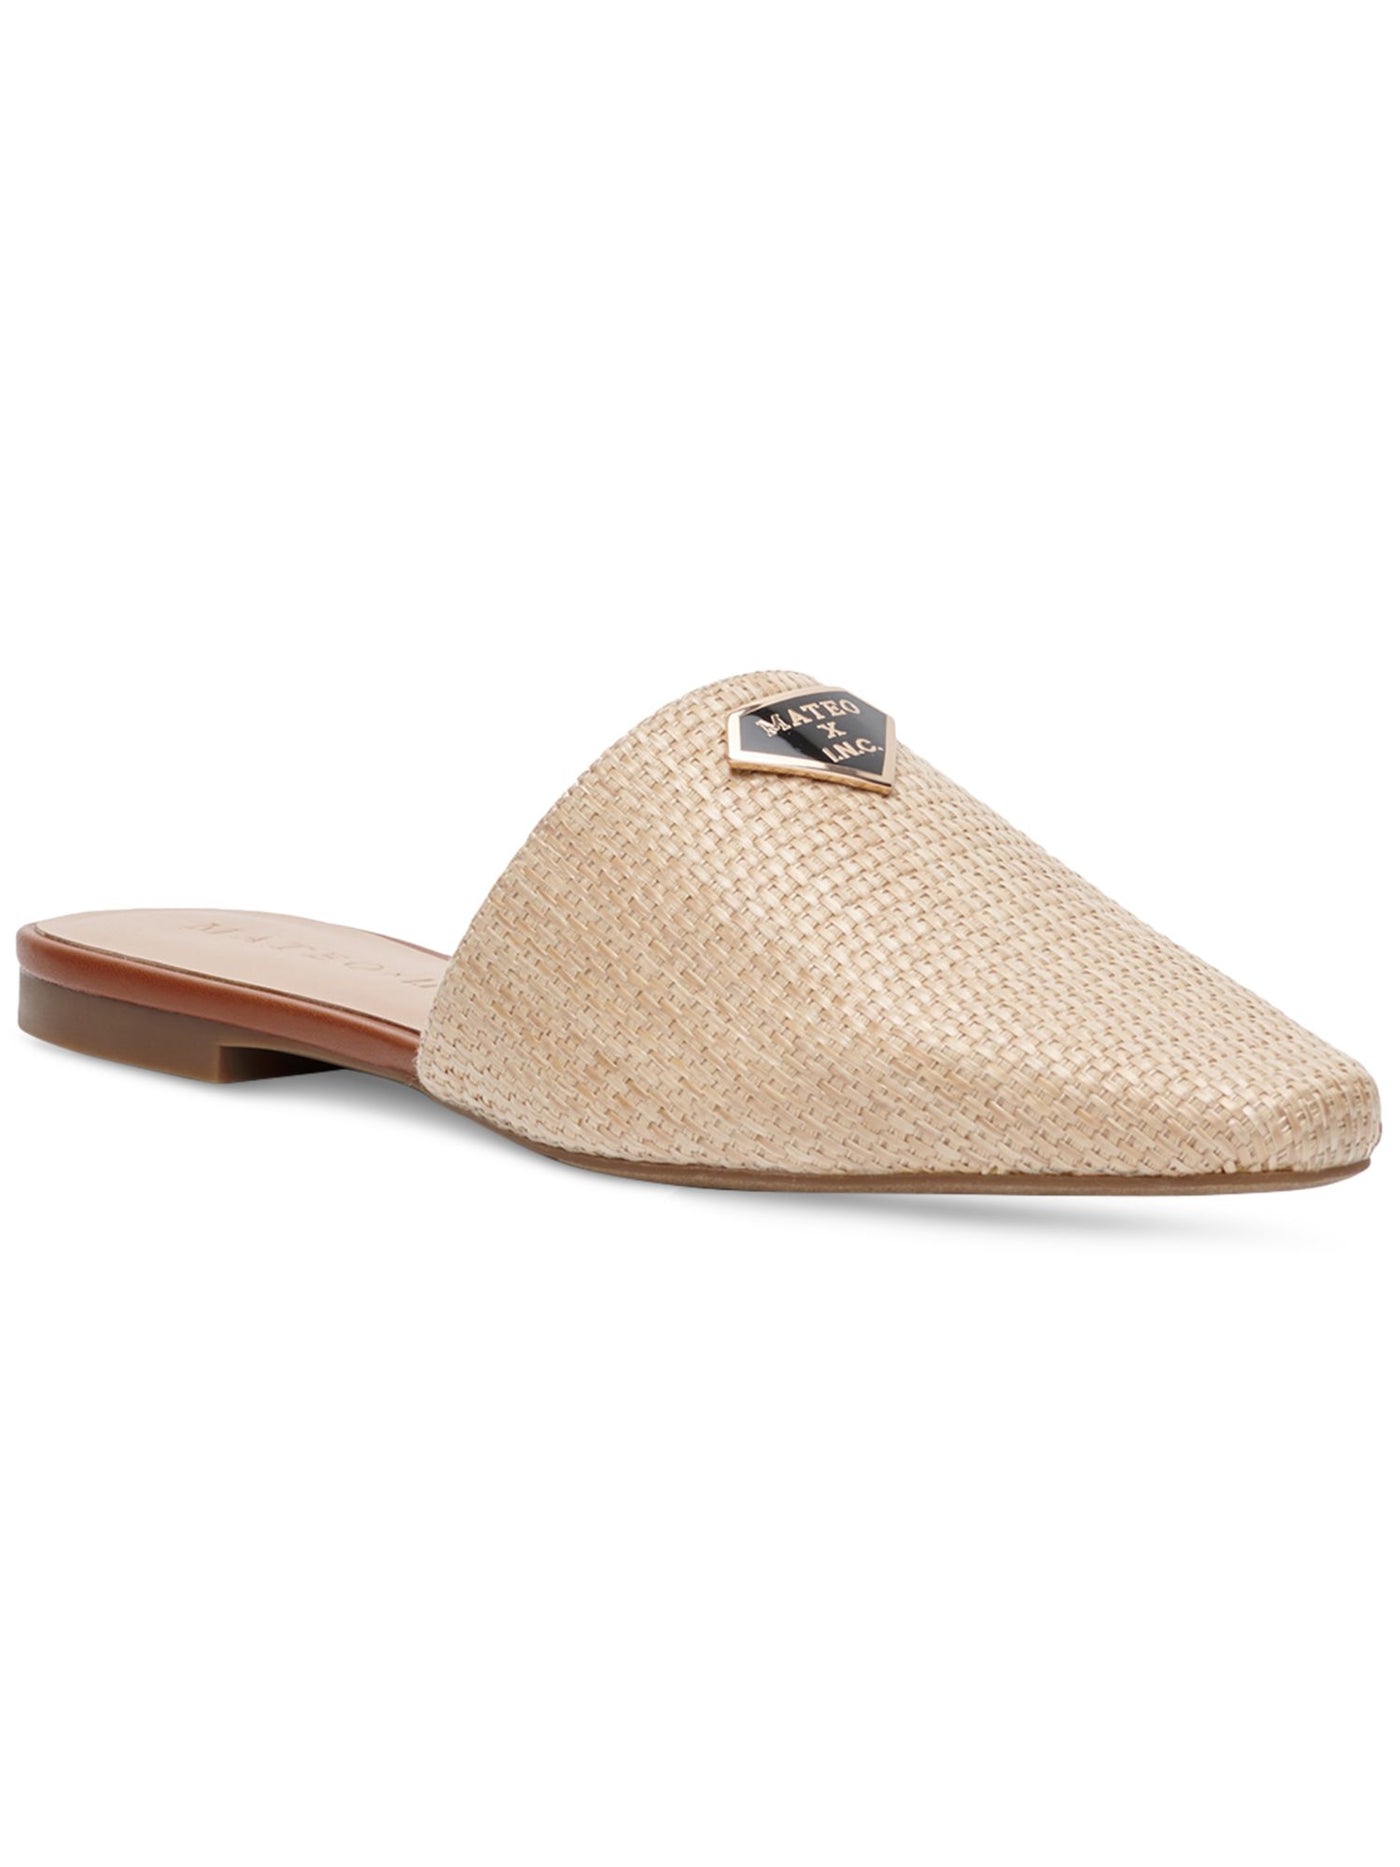 MATEO BY INC Womens Beige Woven Goring The Negril Square Toe Slip On Mules 9 M